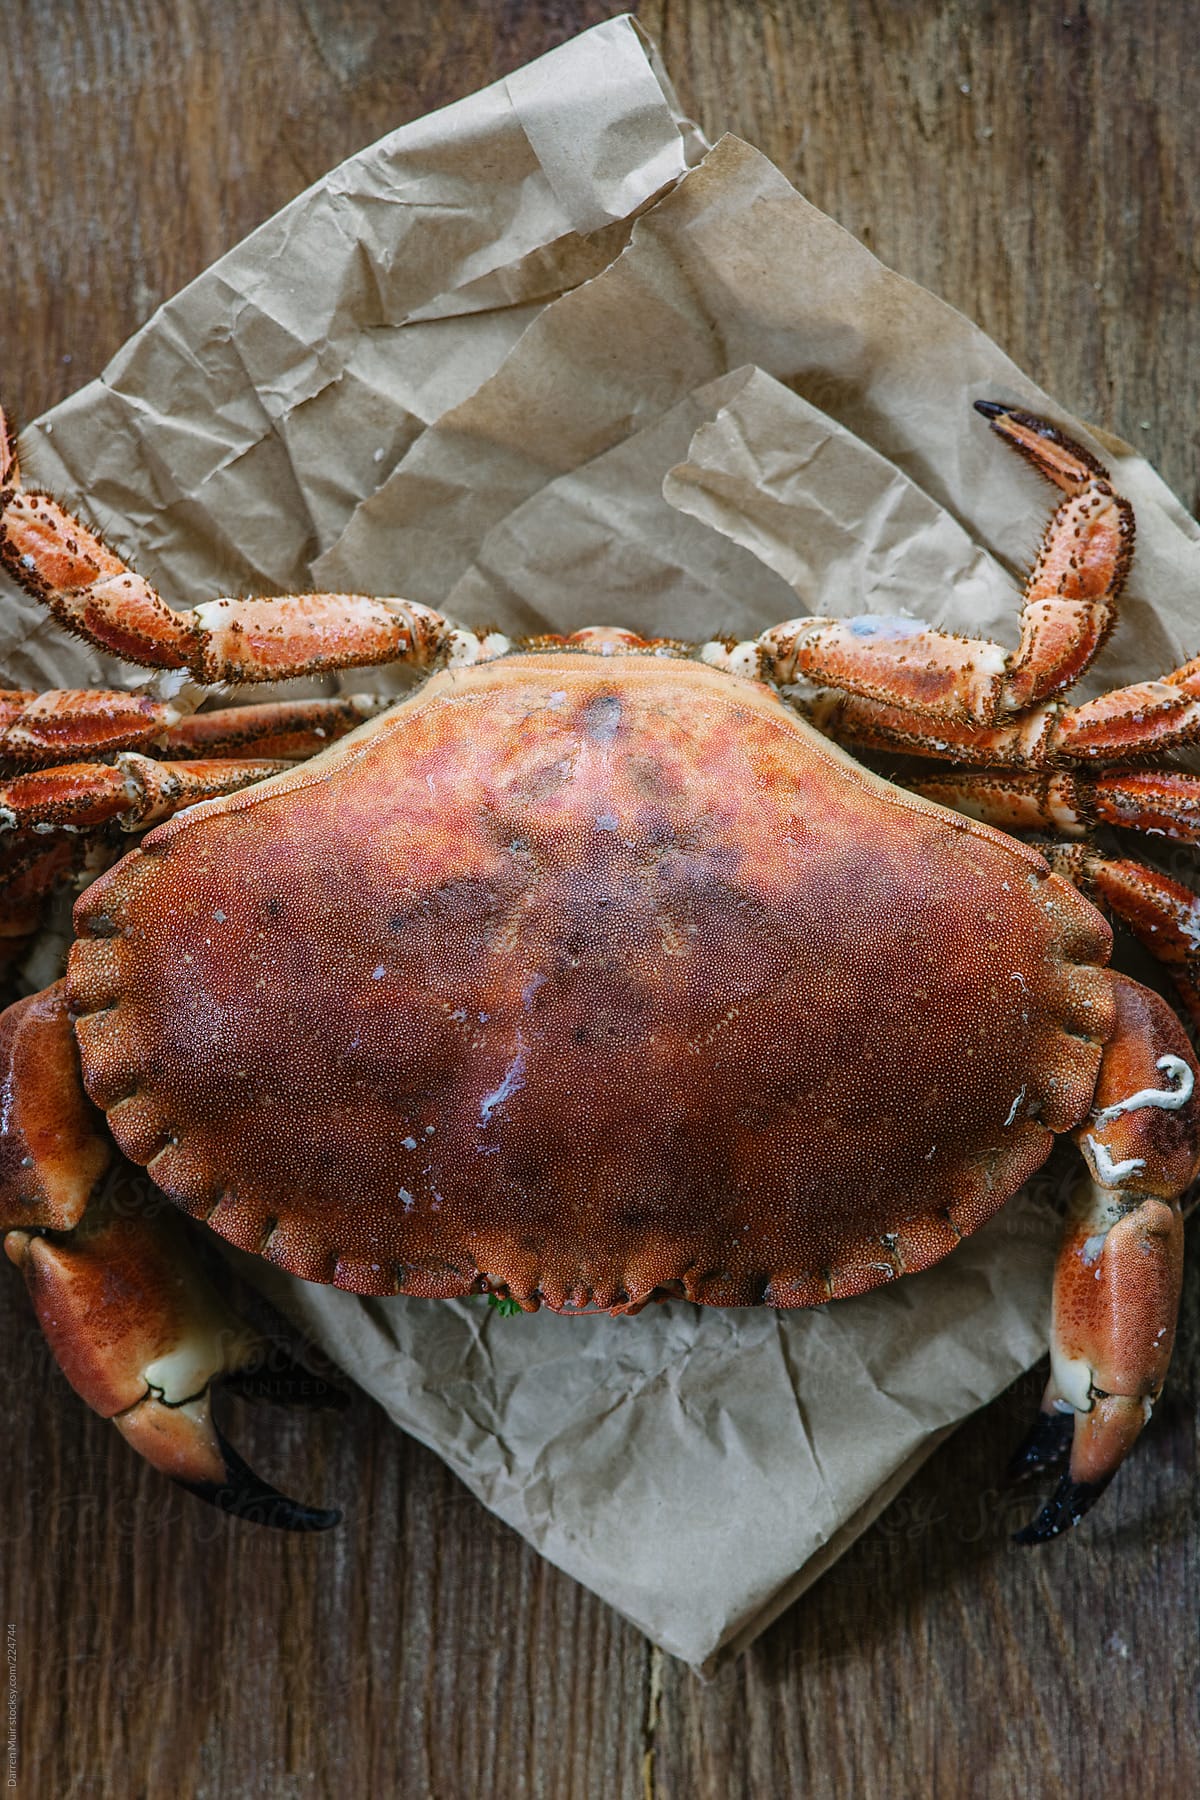 Whole crab on wooden board.